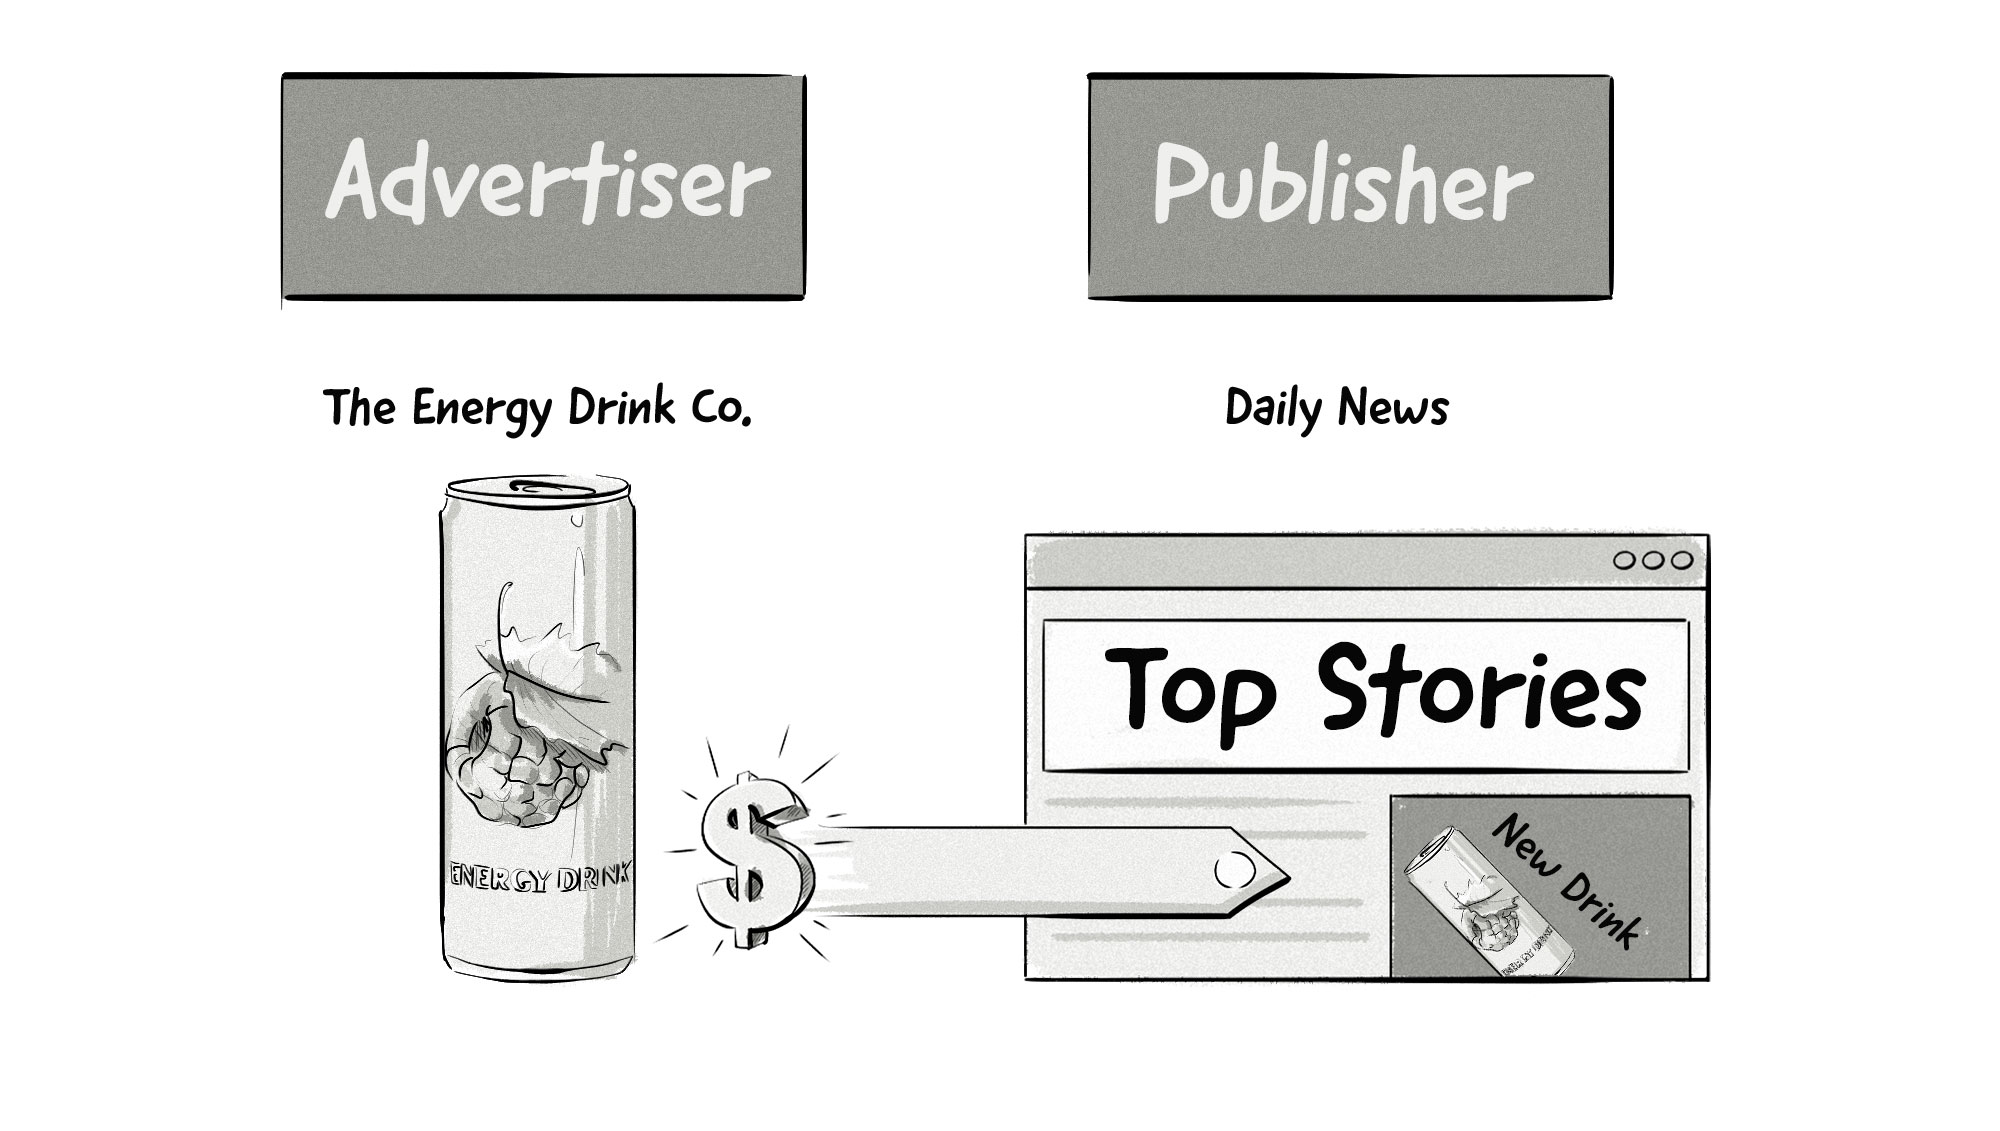 The relationship between an advertiser and a publisher